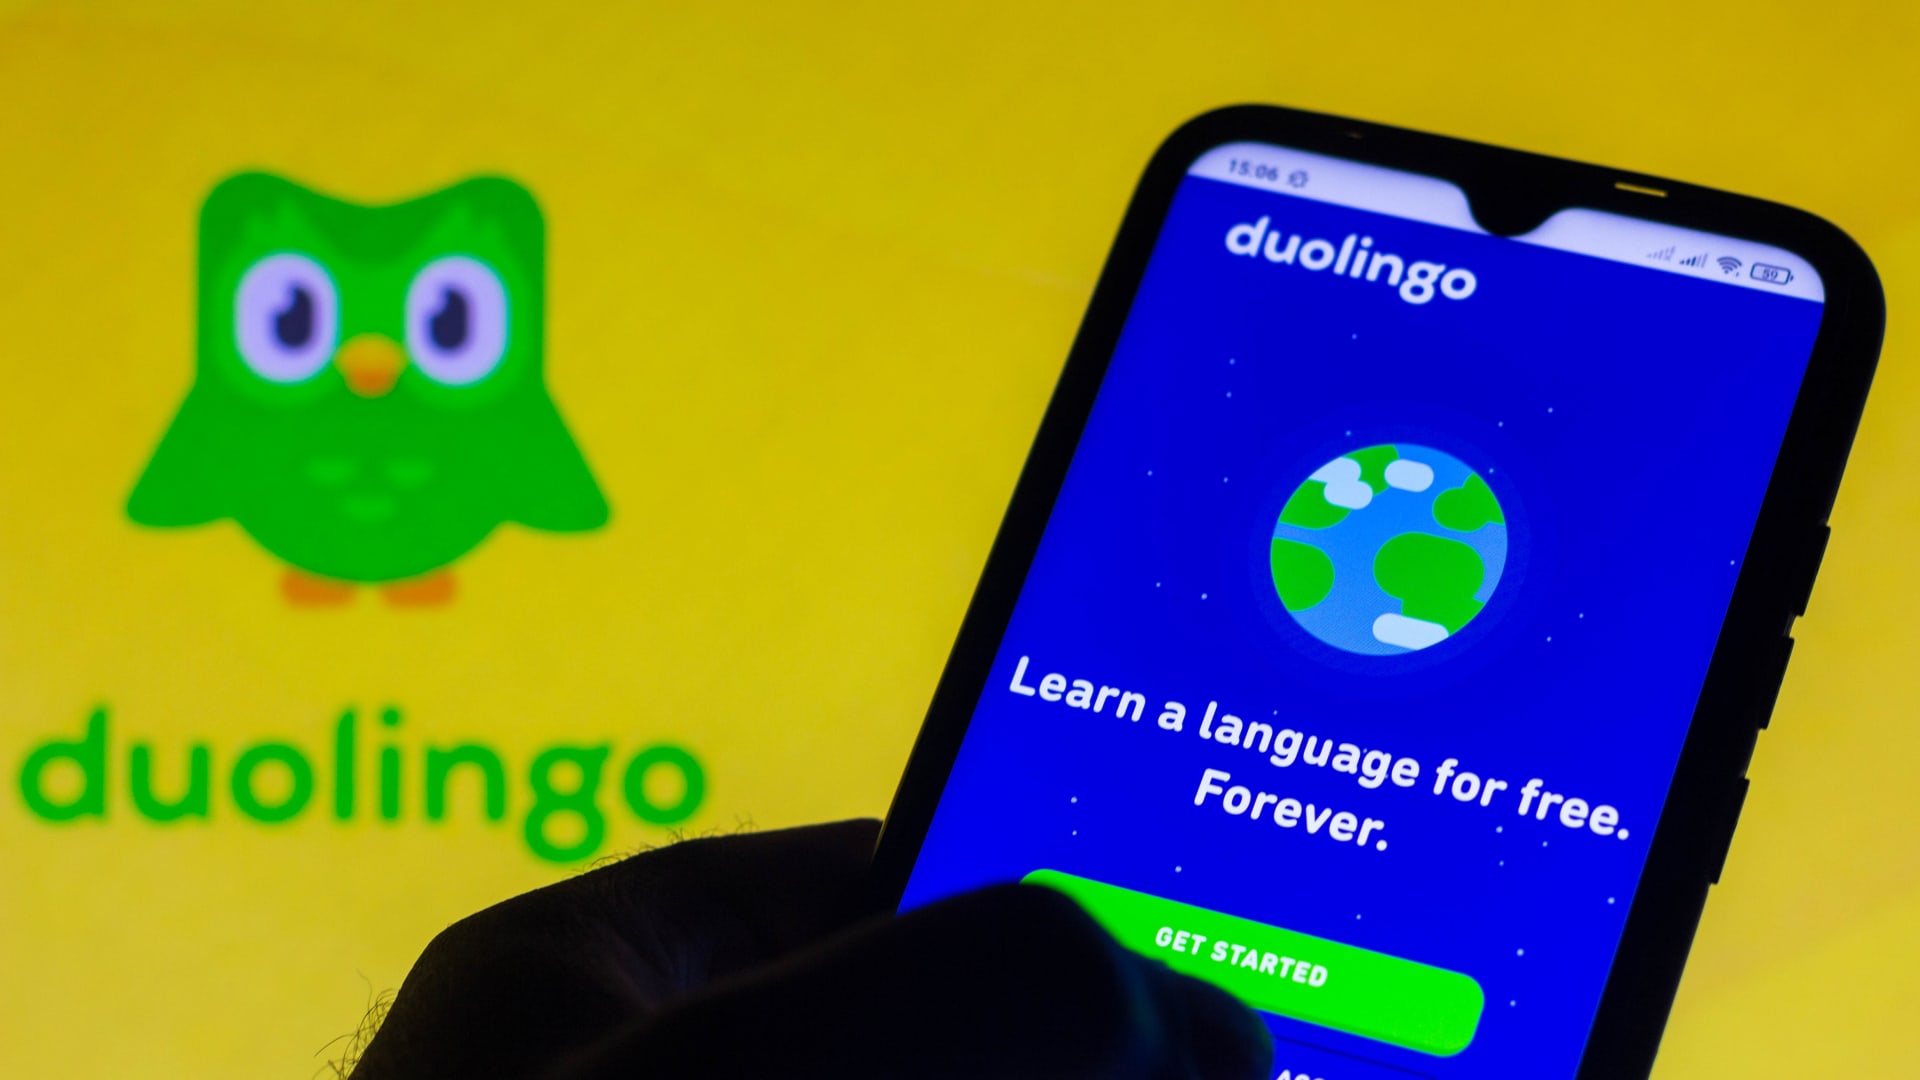 This language app with 40% upside is JPMorgan’s favorite education play [Video]